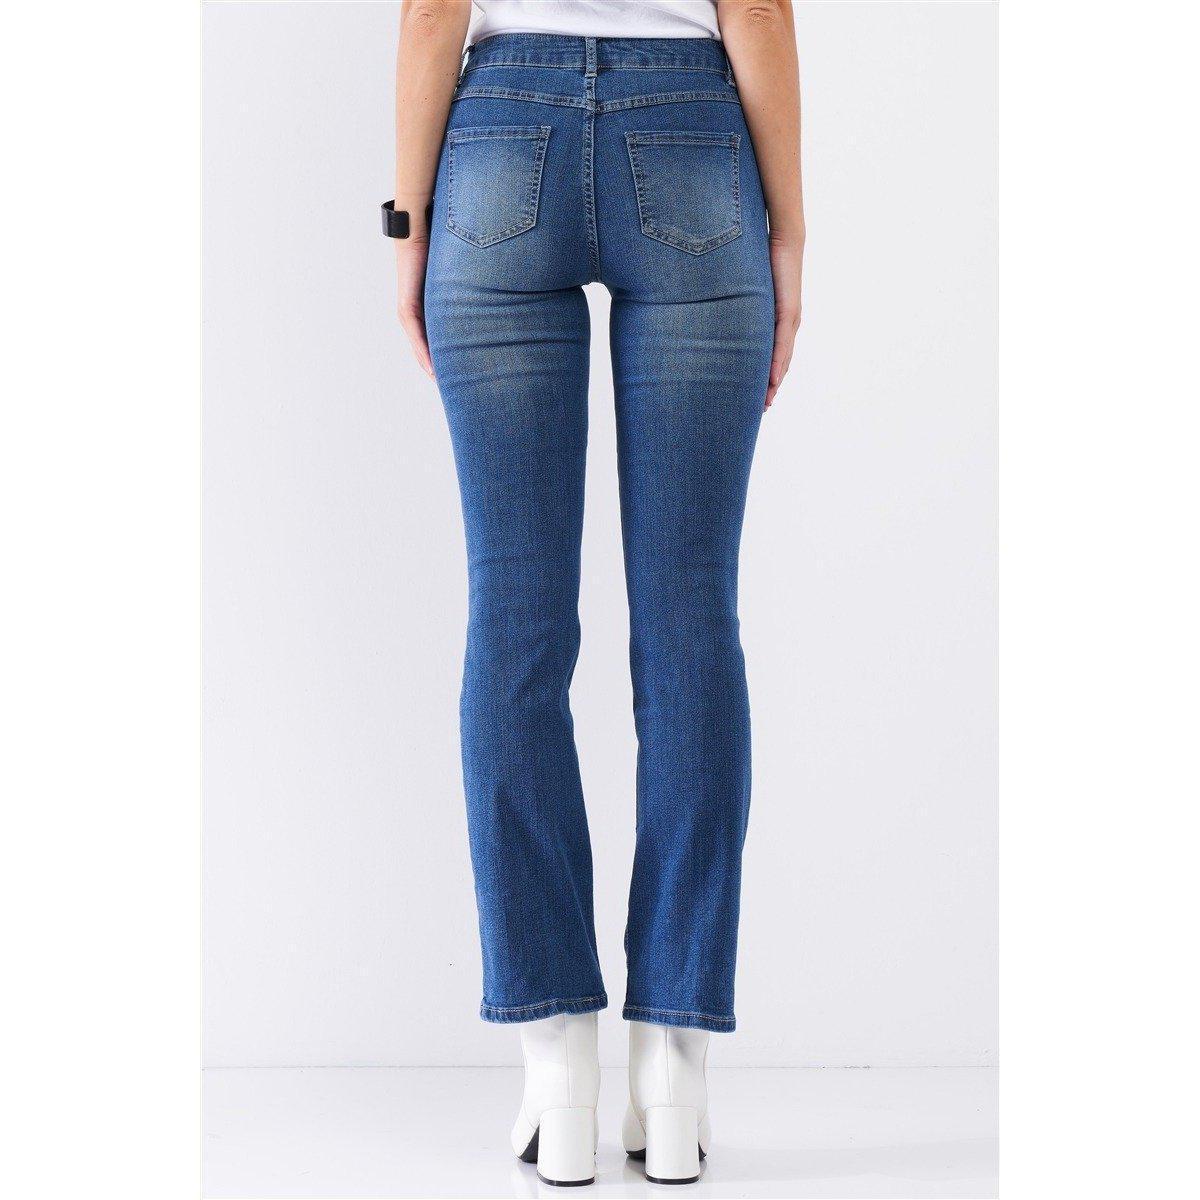 Medium Blue Denim High Waisted Skinny Boot Recycled Jeans-Women - Apparel - Pants - Trousers-NXTLVLNYC